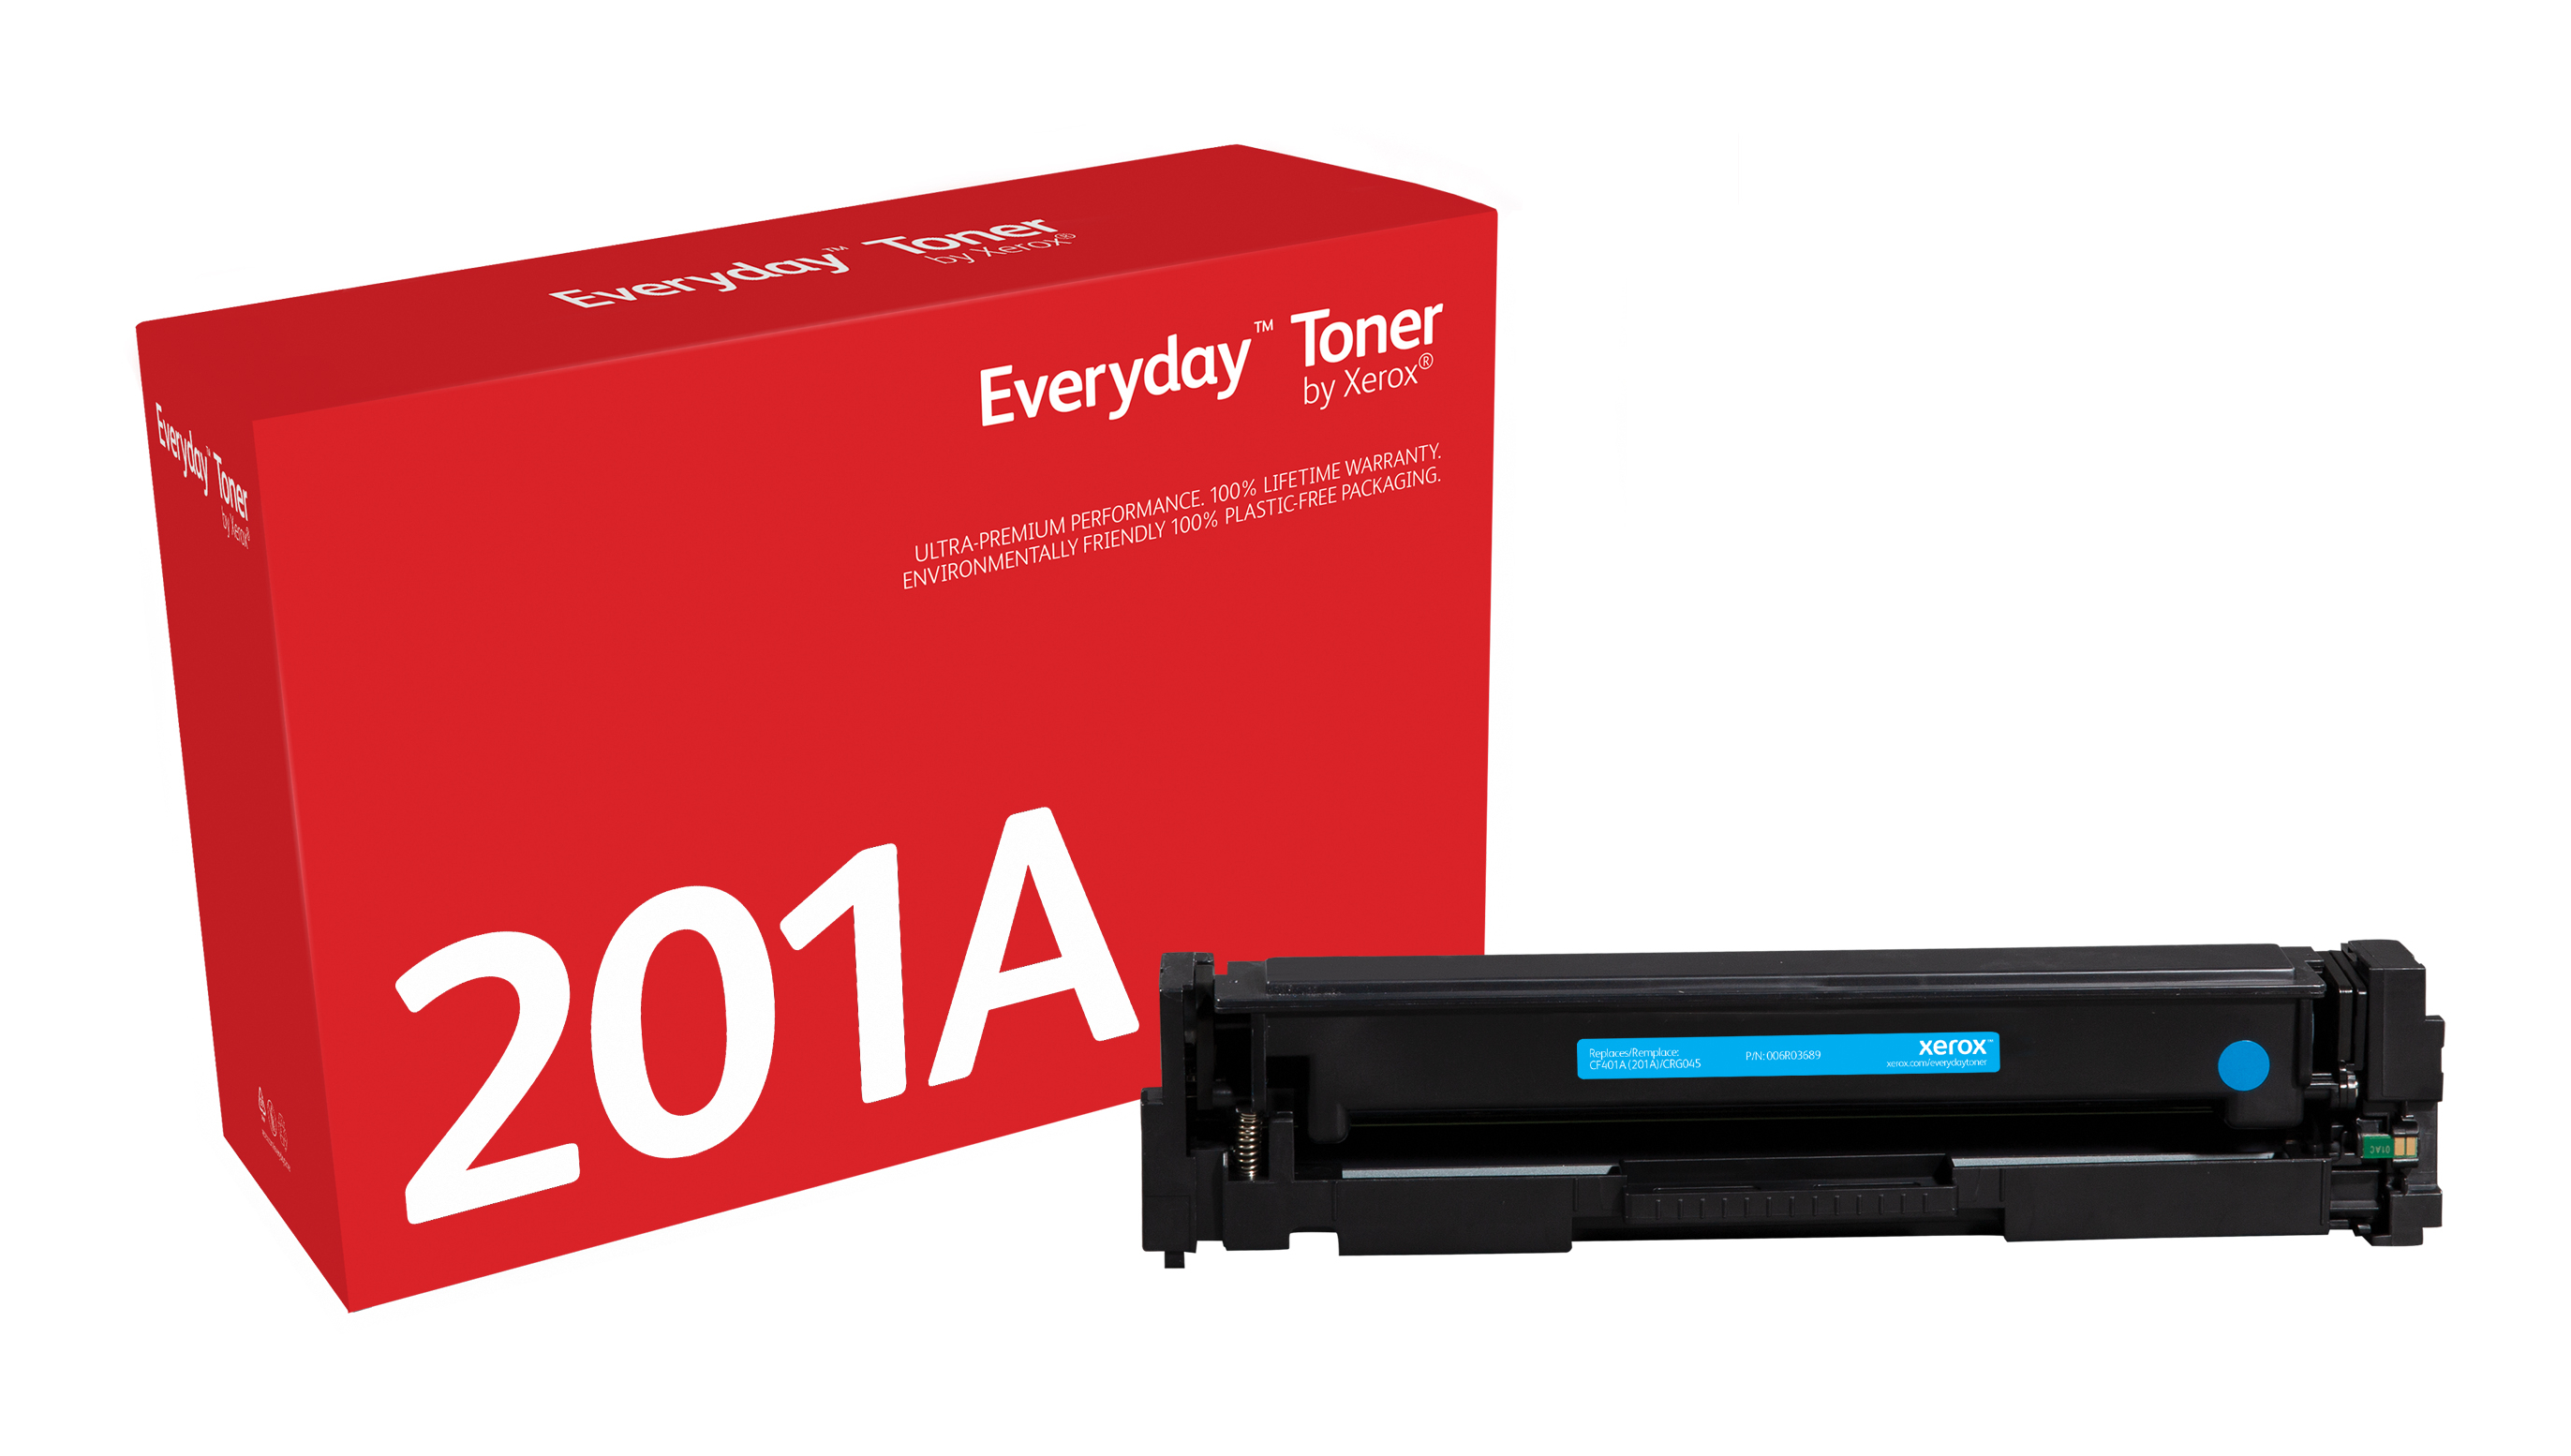 Everyday Cyan Toner compatible with HP 201A (CF401A), Standard Yield  006R03689 by Xerox